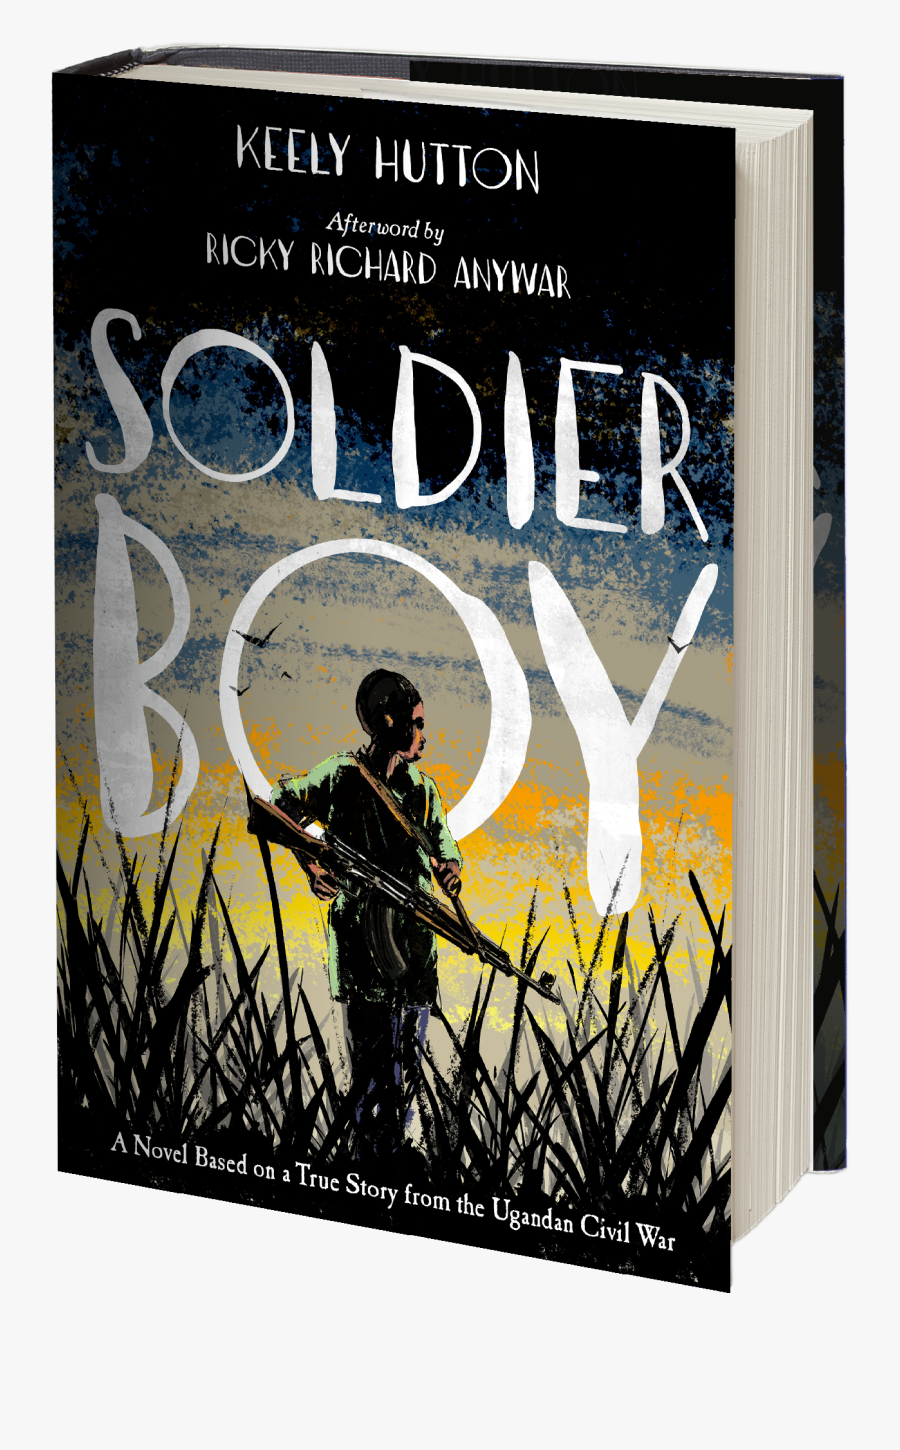 Soldier Boy Cover - Soldier Boy By Keely Hutton, Transparent Clipart